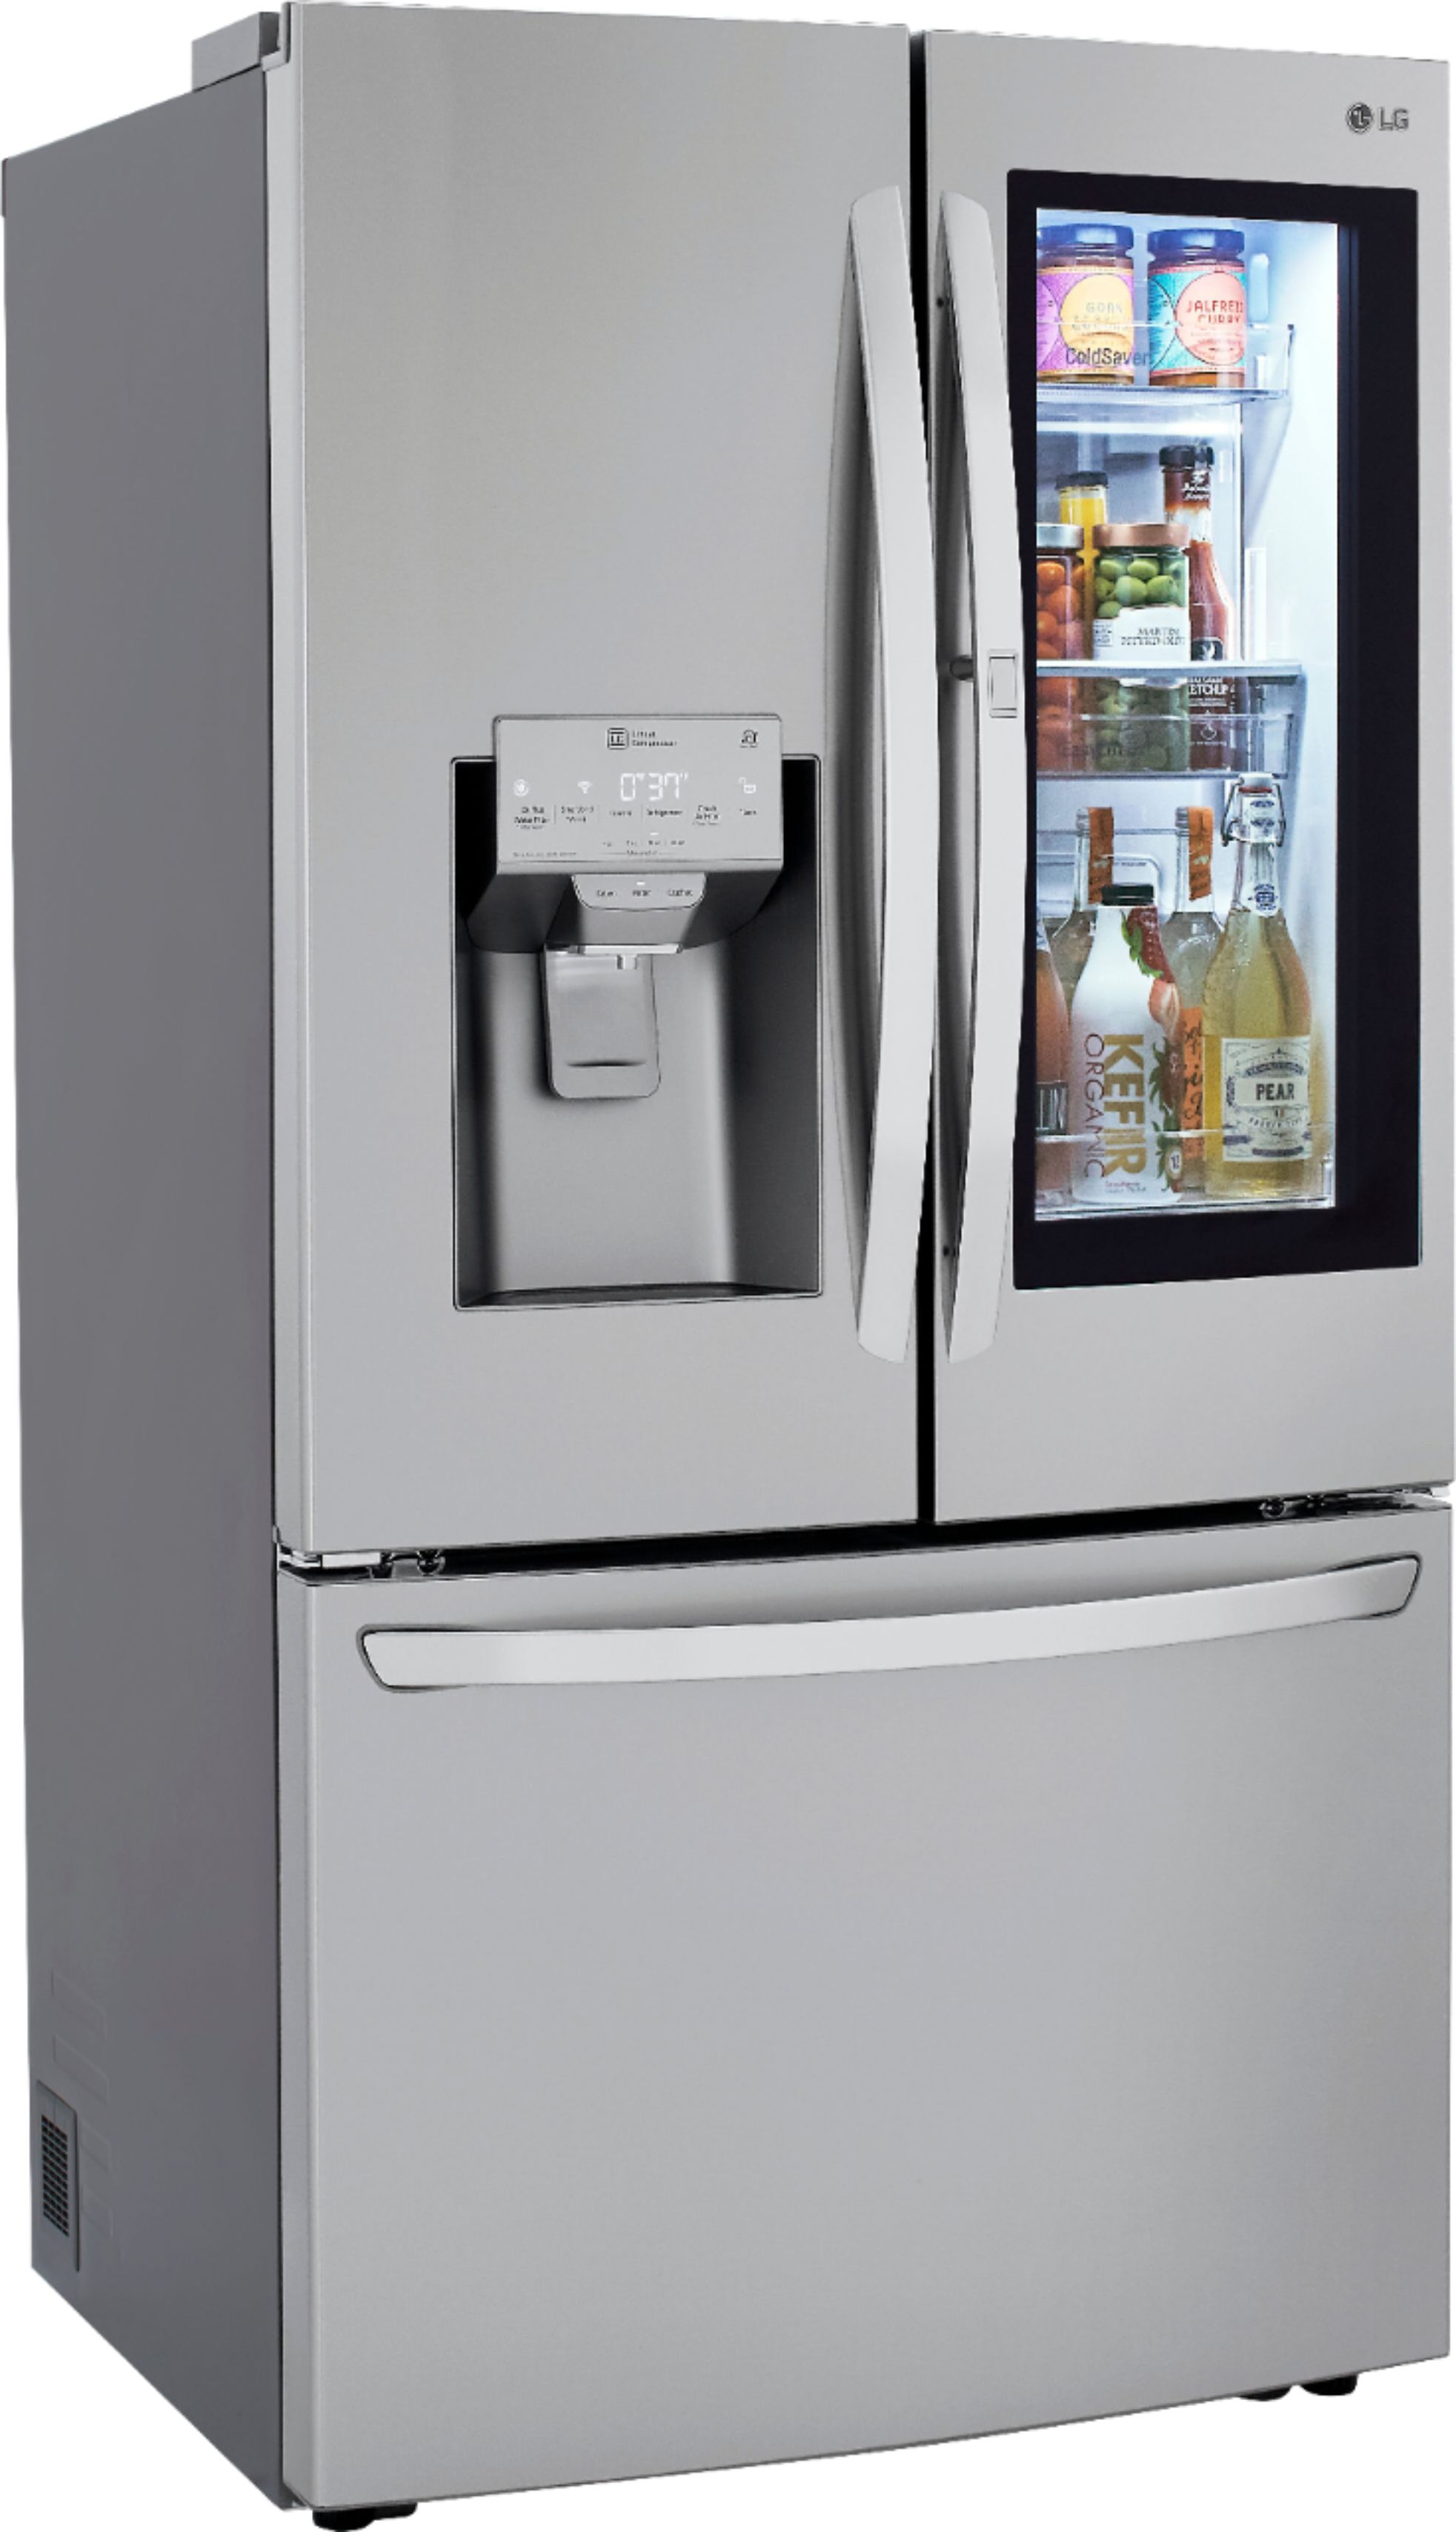 Angle View: LG - 29.7 Cu. Ft. French InstaView Door-in-Door Refrigerator with Craft Ice - Stainless steel